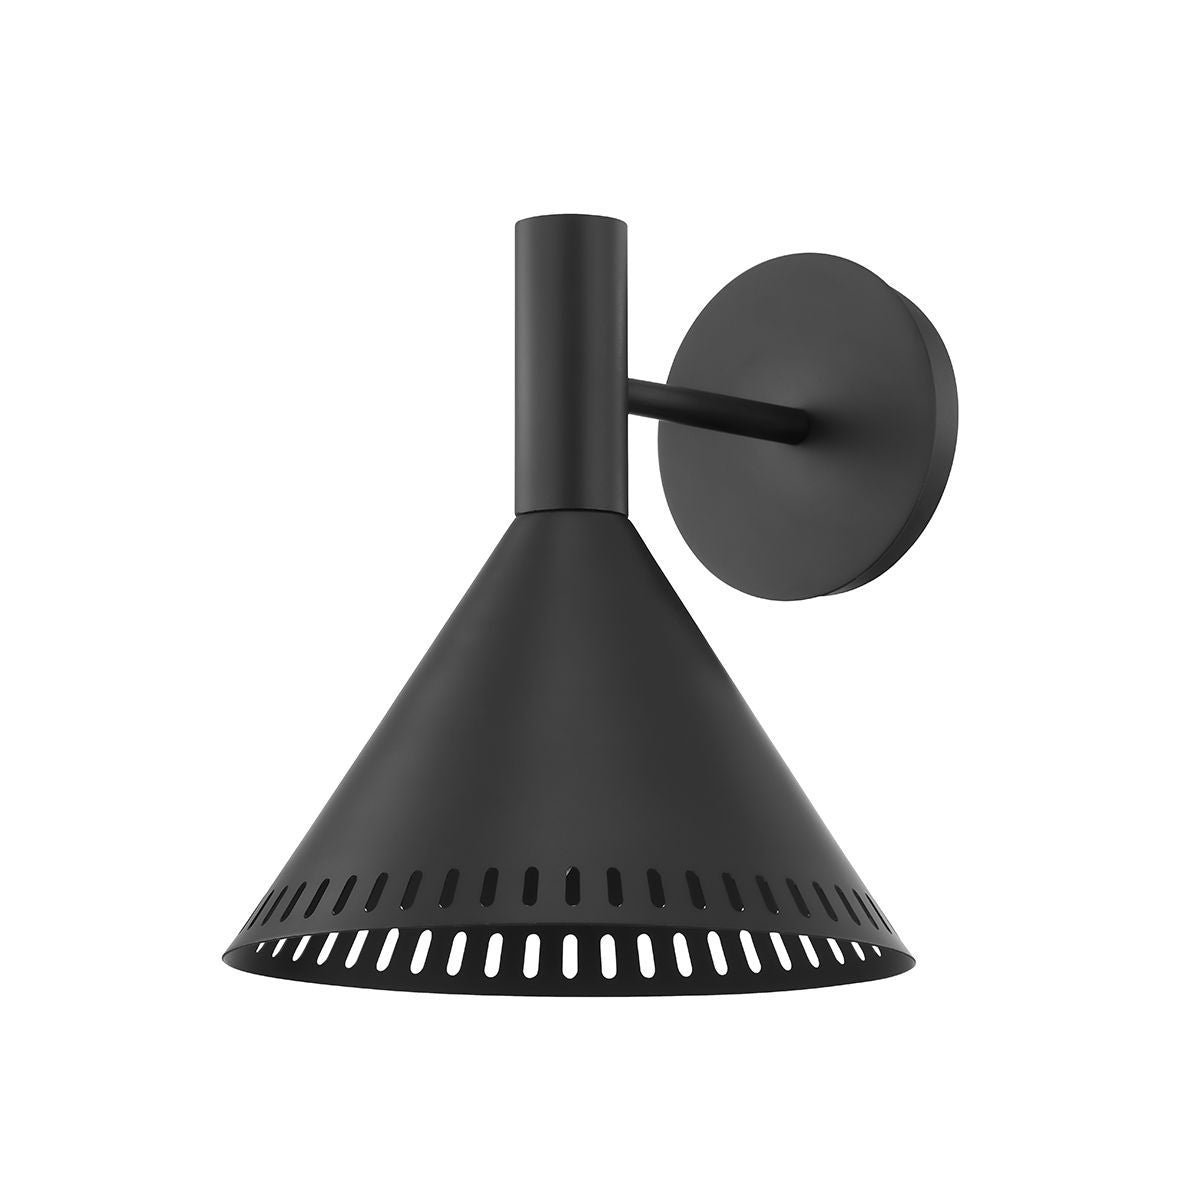 Atticus 10 in. Armed Sconce Satin Black finish - Bees Lighting